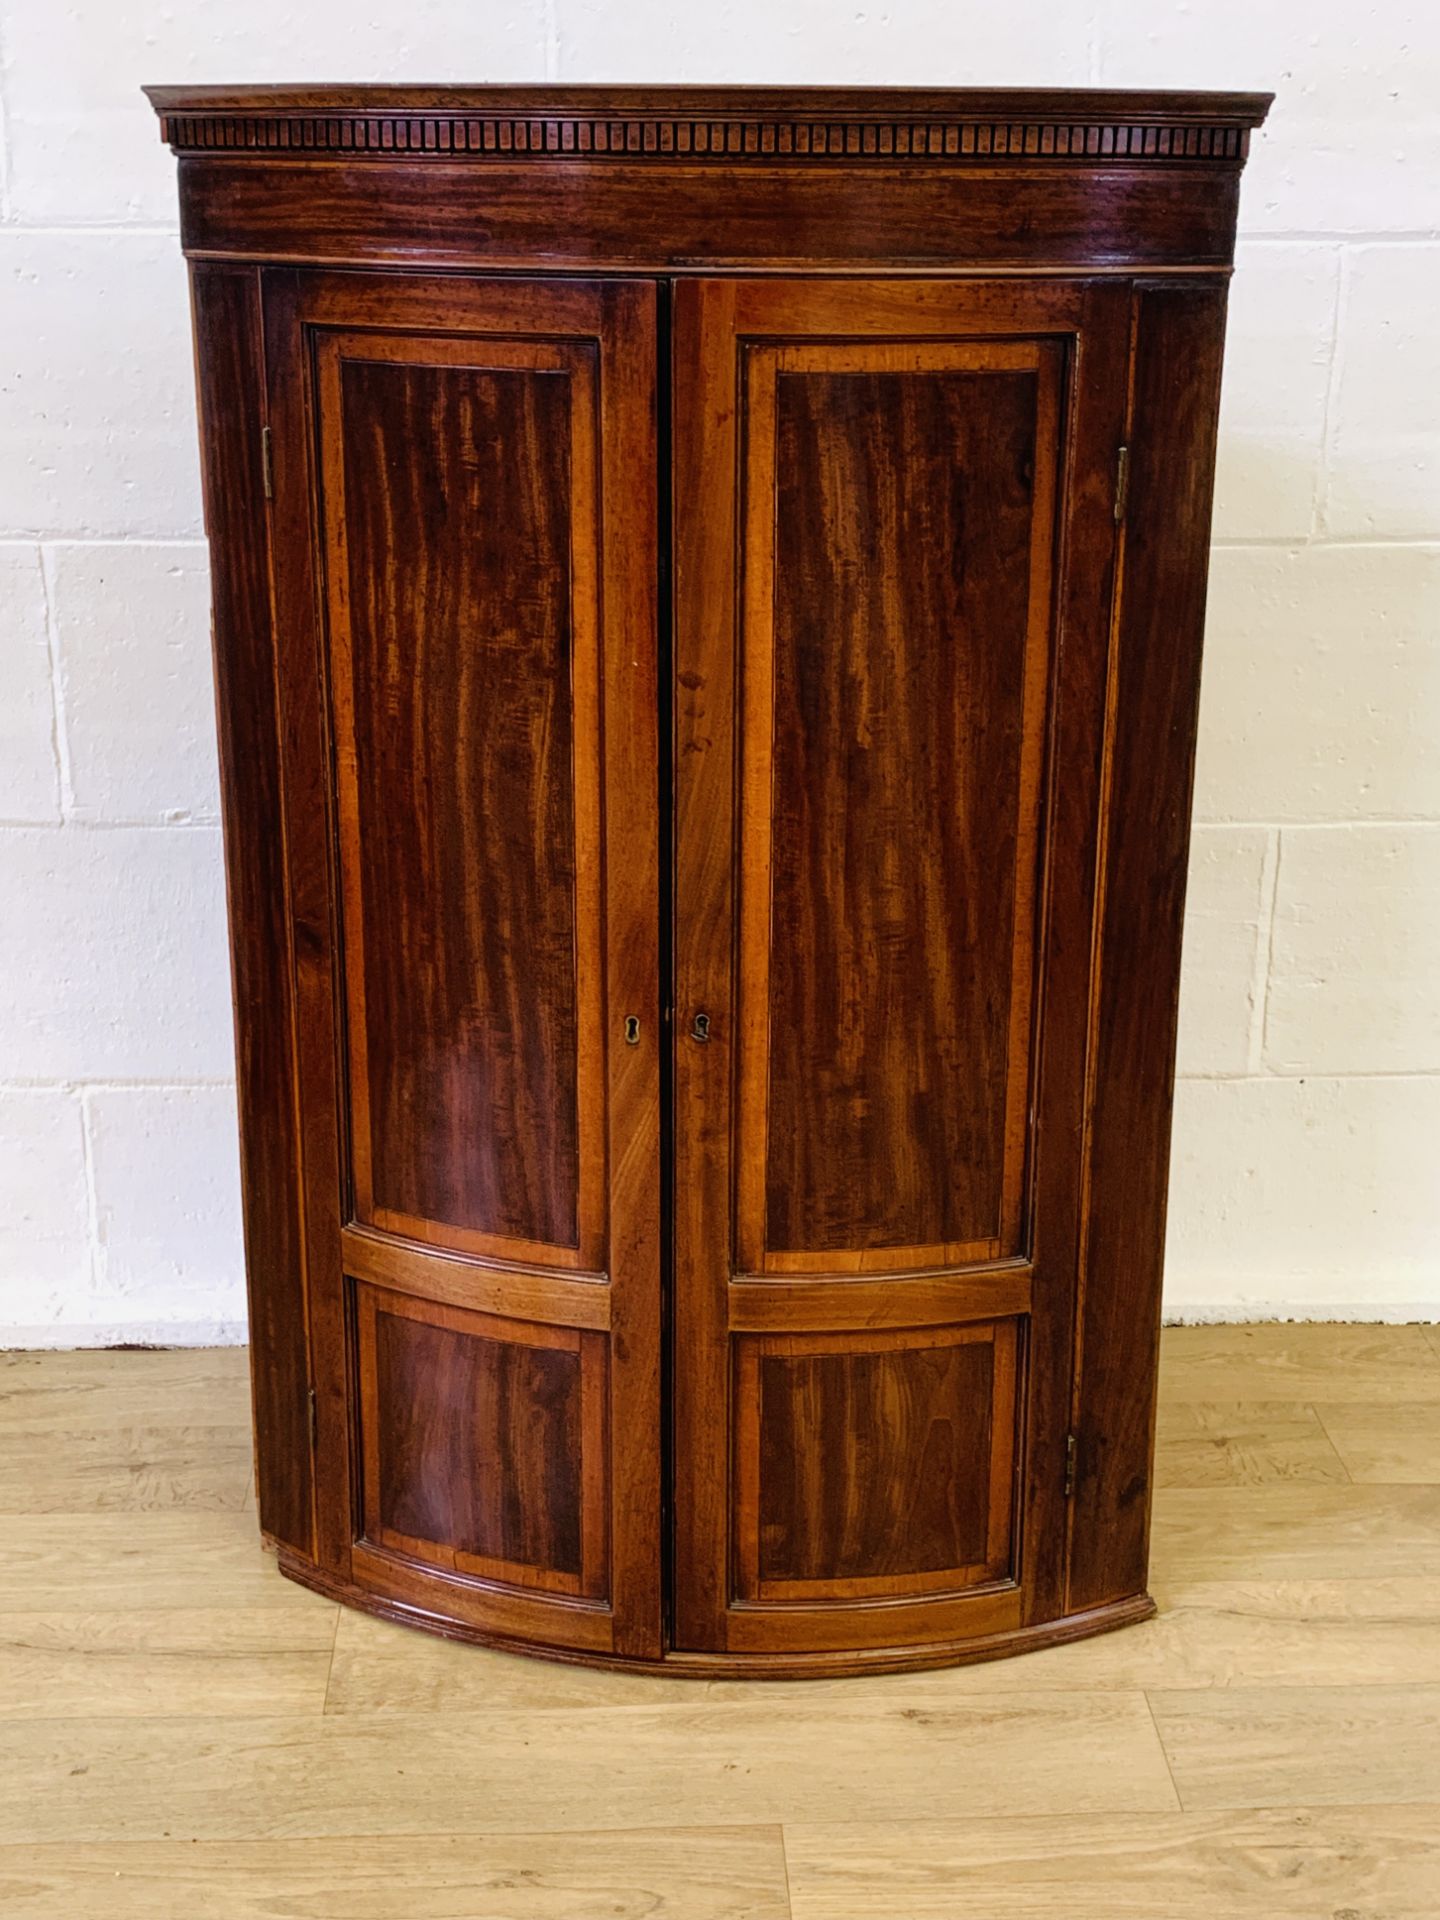 Bow fronted corner cabinet